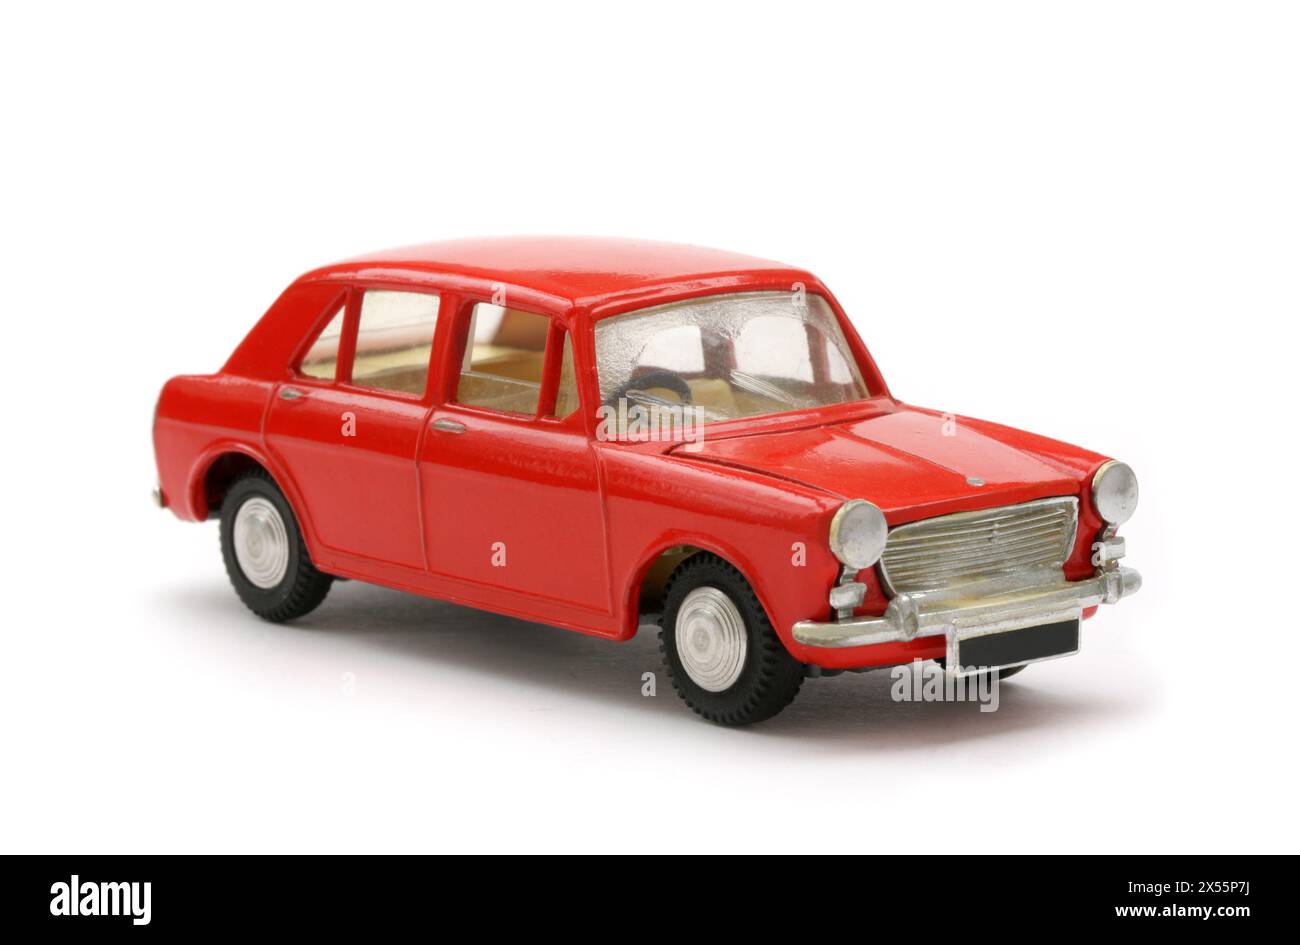 Traing Morris 1100 sixties scale model toy car Stock Photo